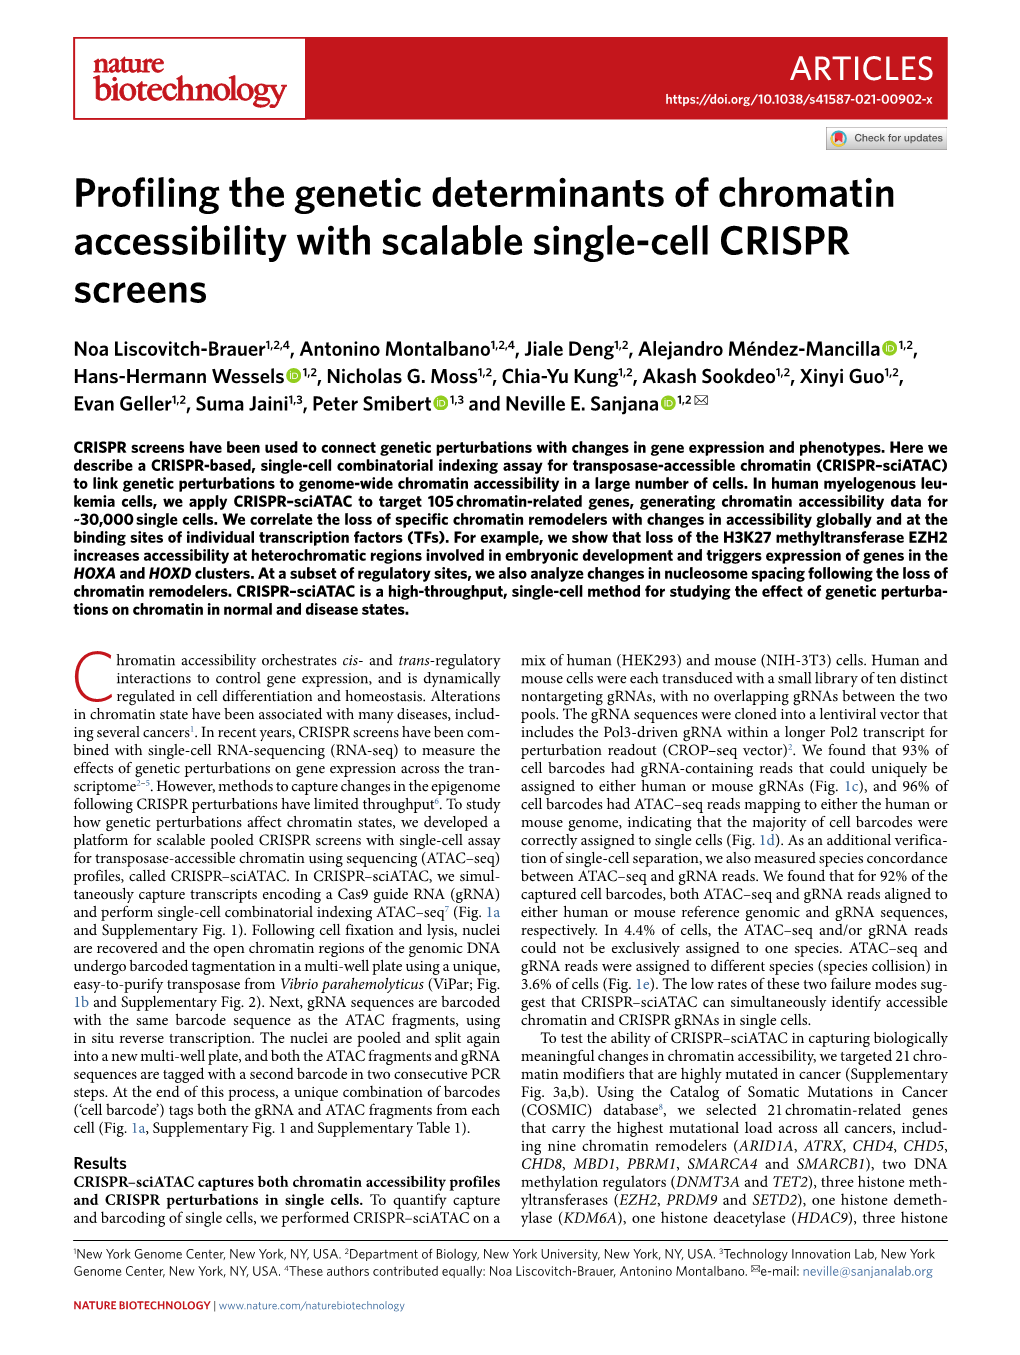 Profiling the Genetic Determinants of Chromatin Accessibility with Scalable Single-Cell CRISPR Screens